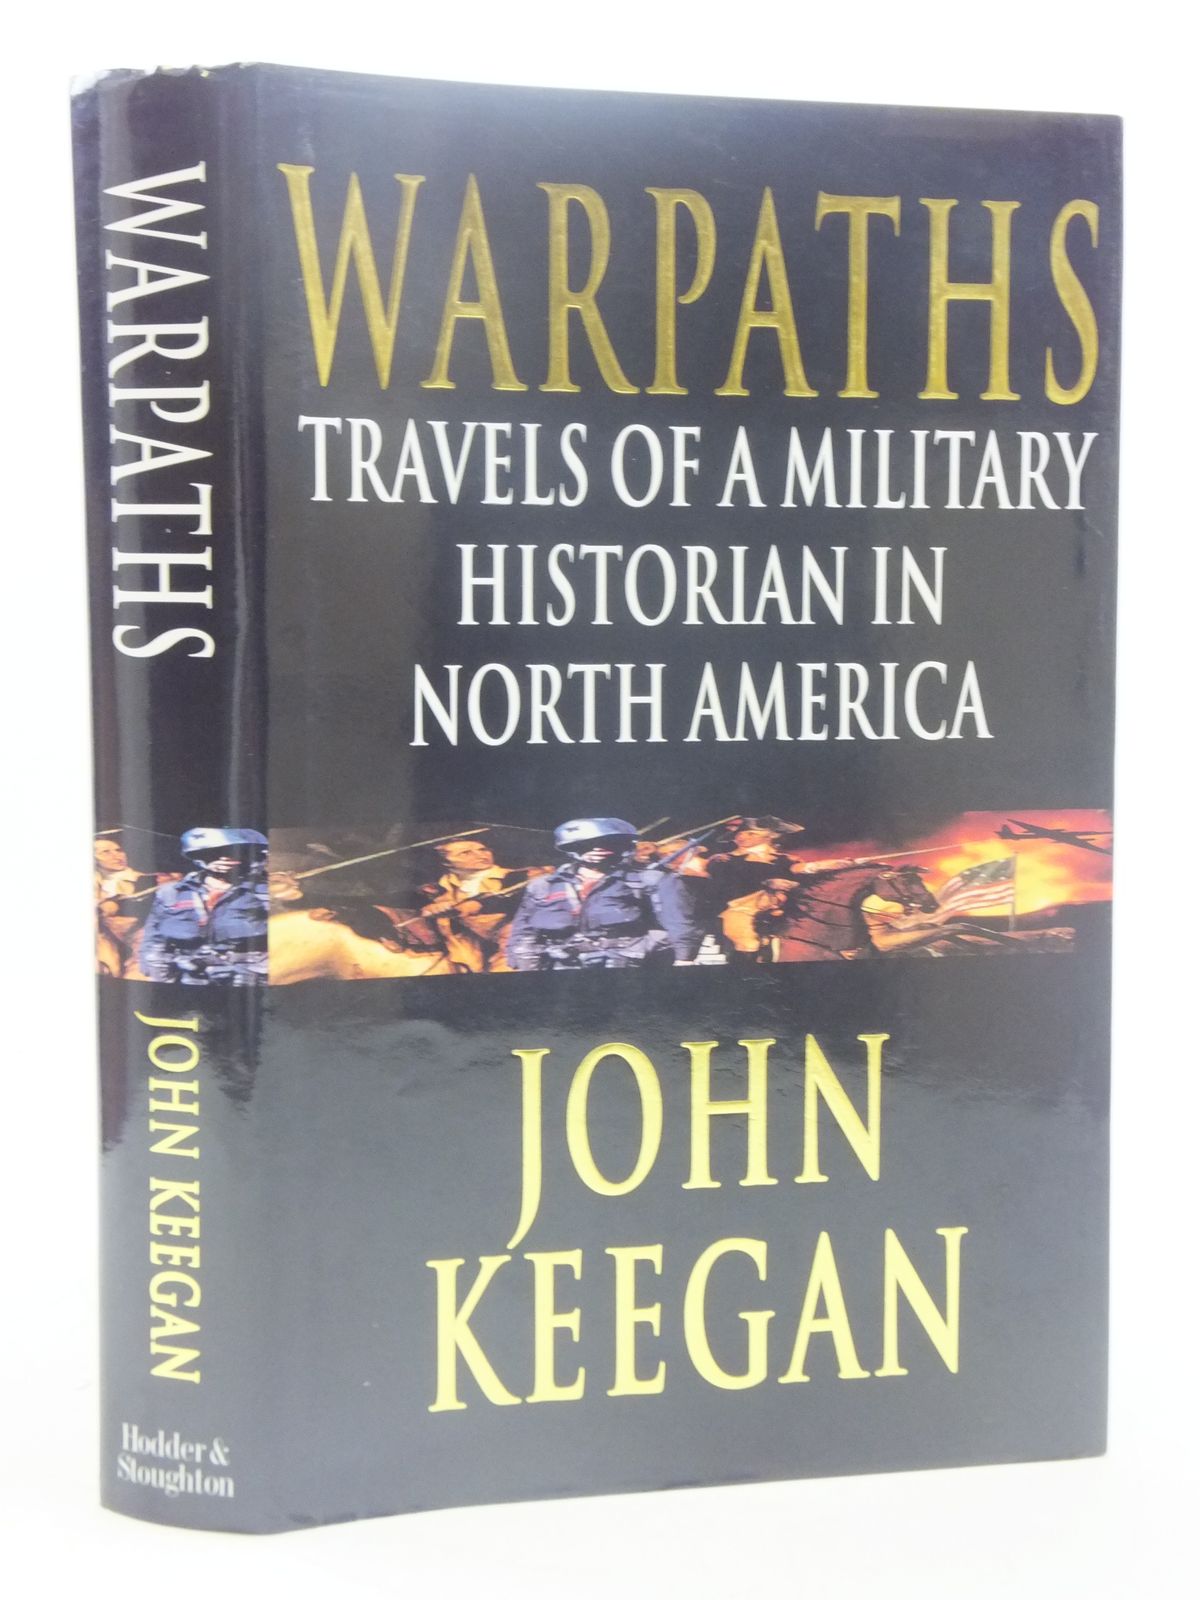 Photo of WARPATHS: TRAVELS OF A MILITARY HISTORIAN IN NORTH AMERICA written by Keegan, John published by Hodder & Stoughton (STOCK CODE: 1605145)  for sale by Stella & Rose's Books